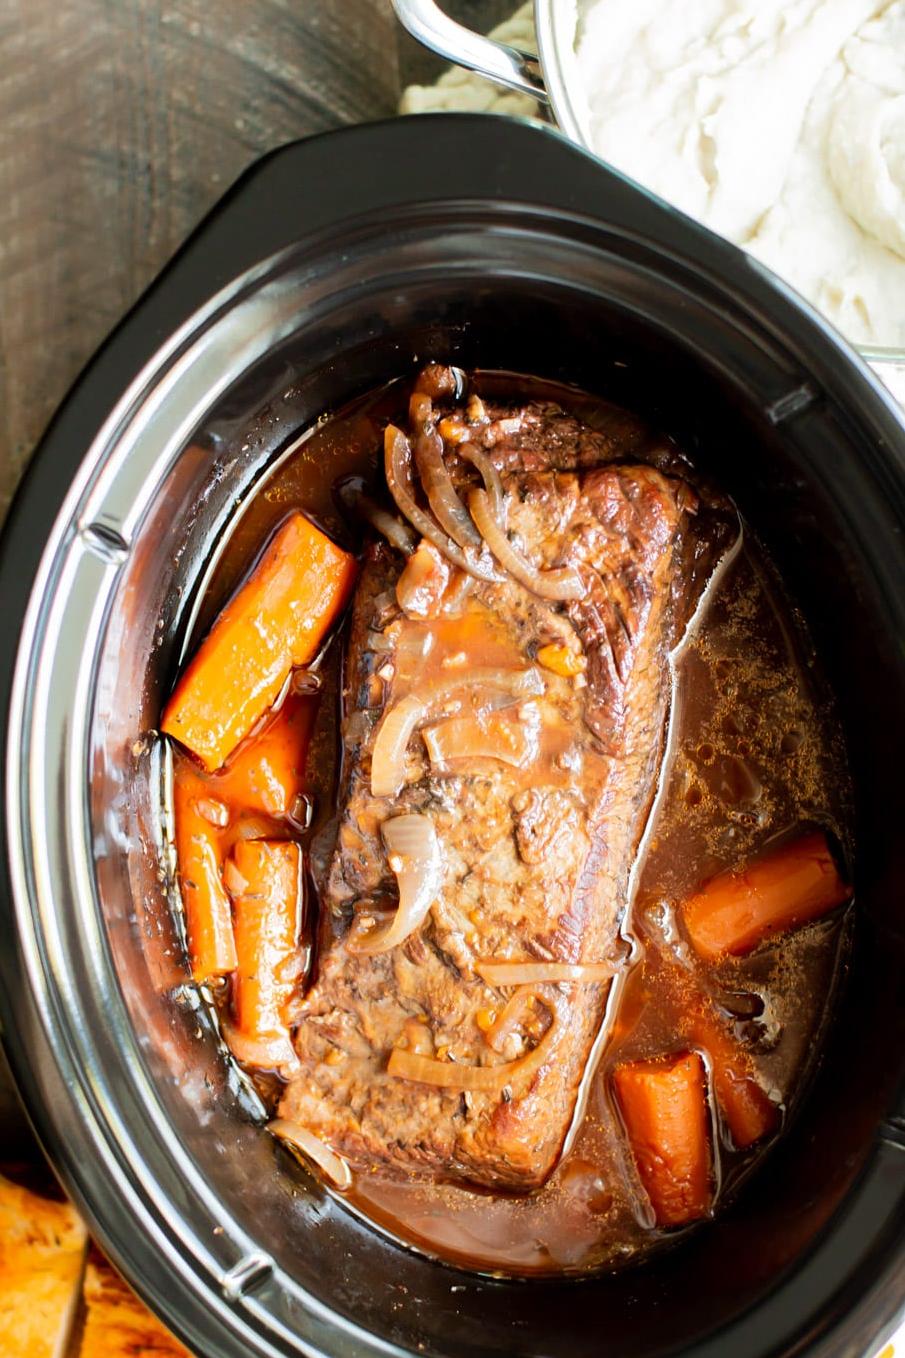 – “Melt-in-Your-Mouth Brisket: A Wine and Broth Recipe